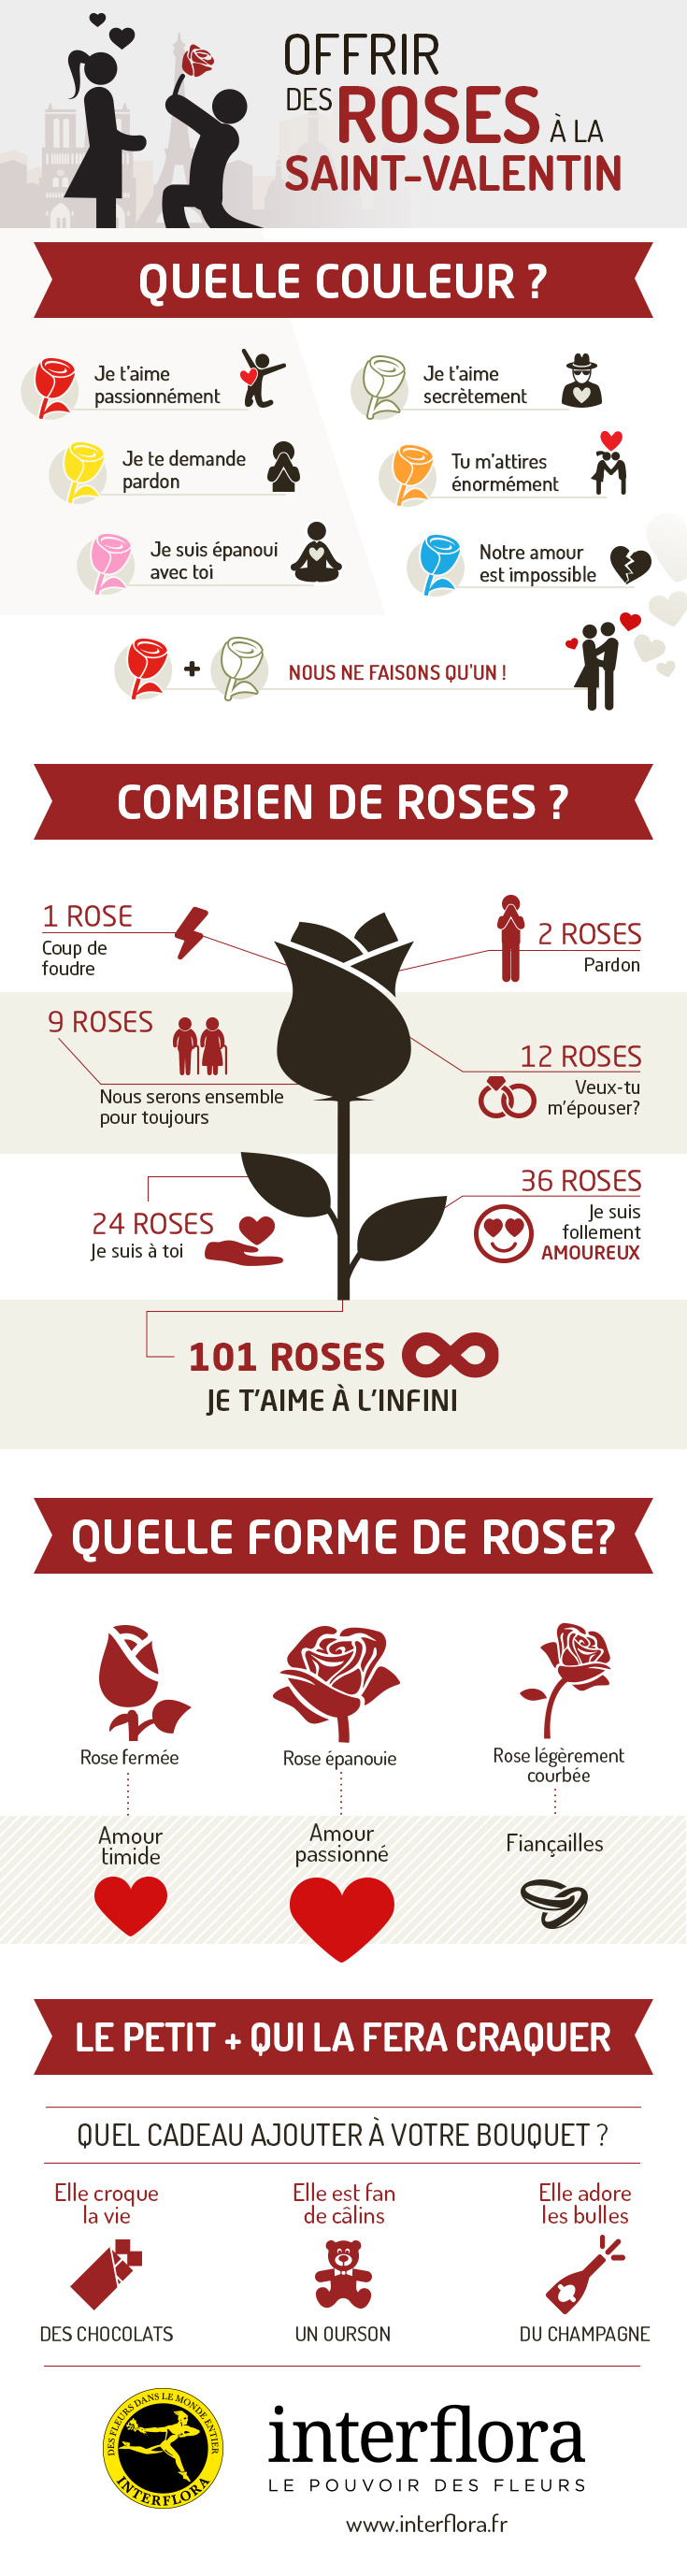 Signification des roses